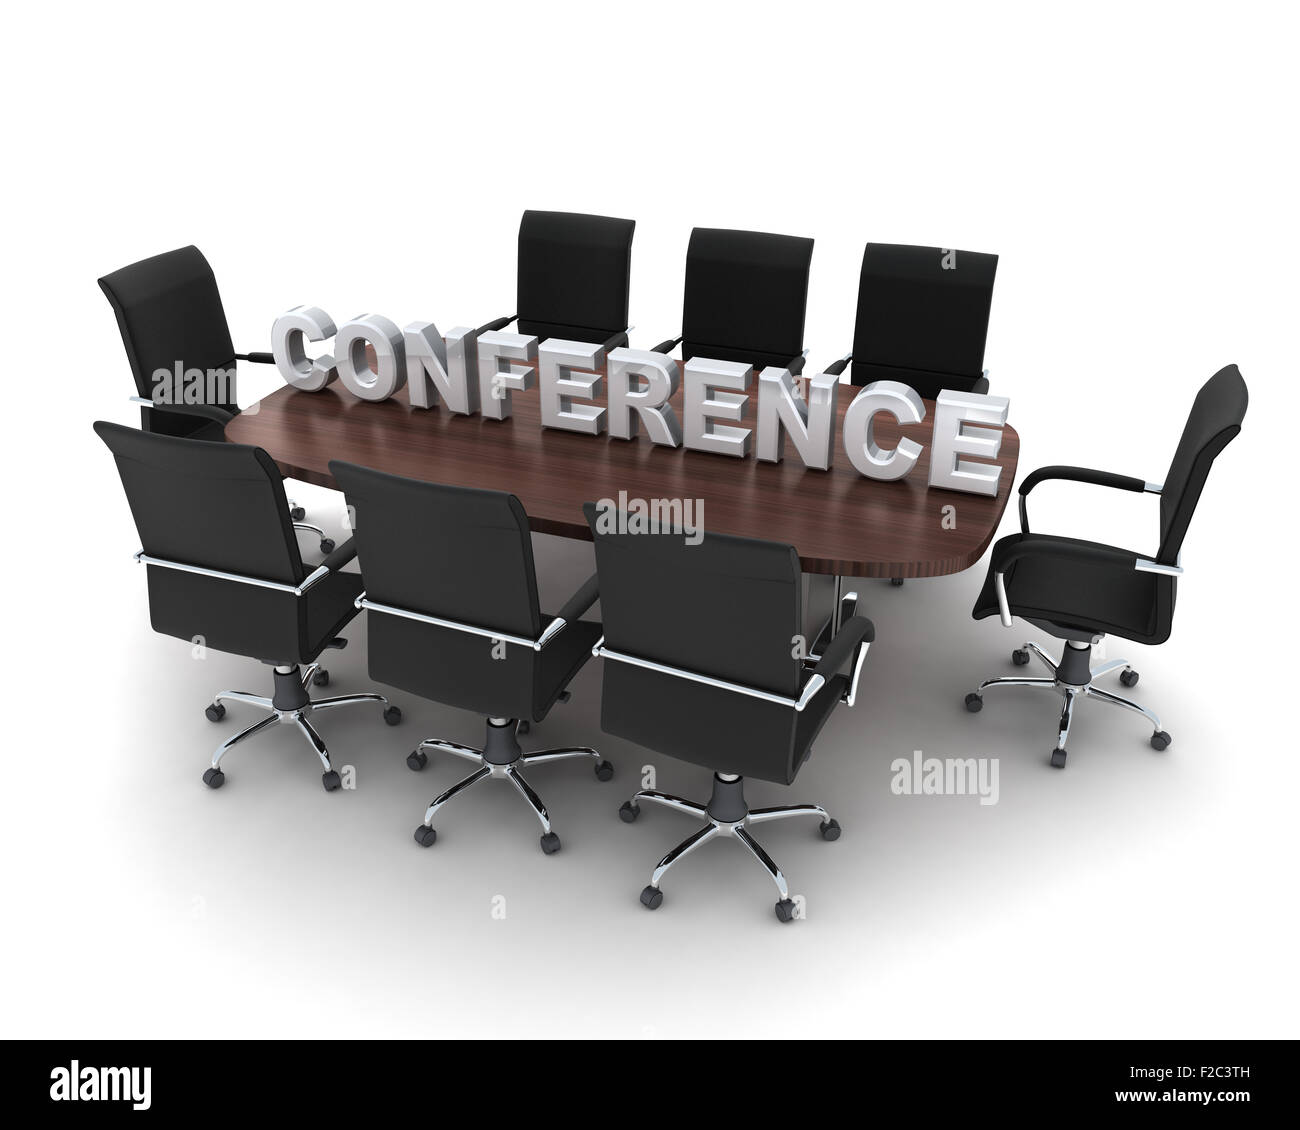 Conference room symbol on white background (done in 3d) Stock Photo